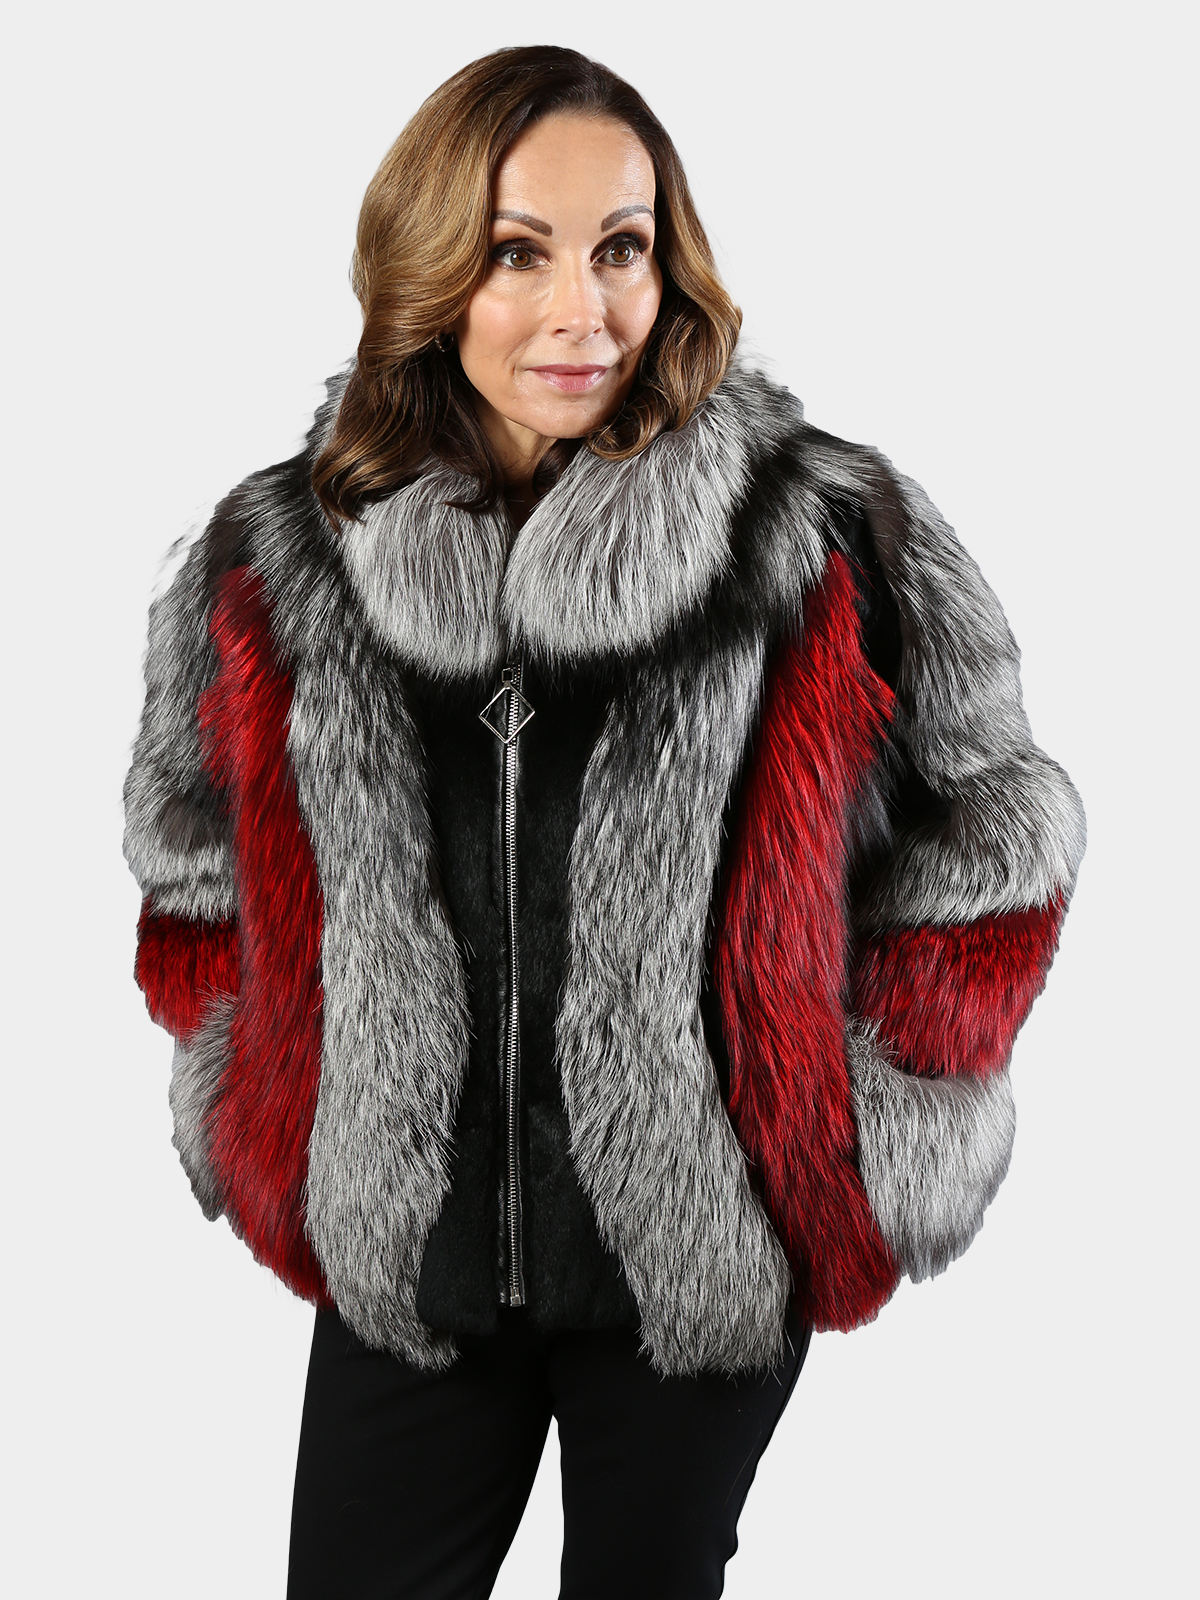 Woman's Natural Silver Fox and Red Dyed Fox Fur Jacket with Black Rex Rabbit Inserts